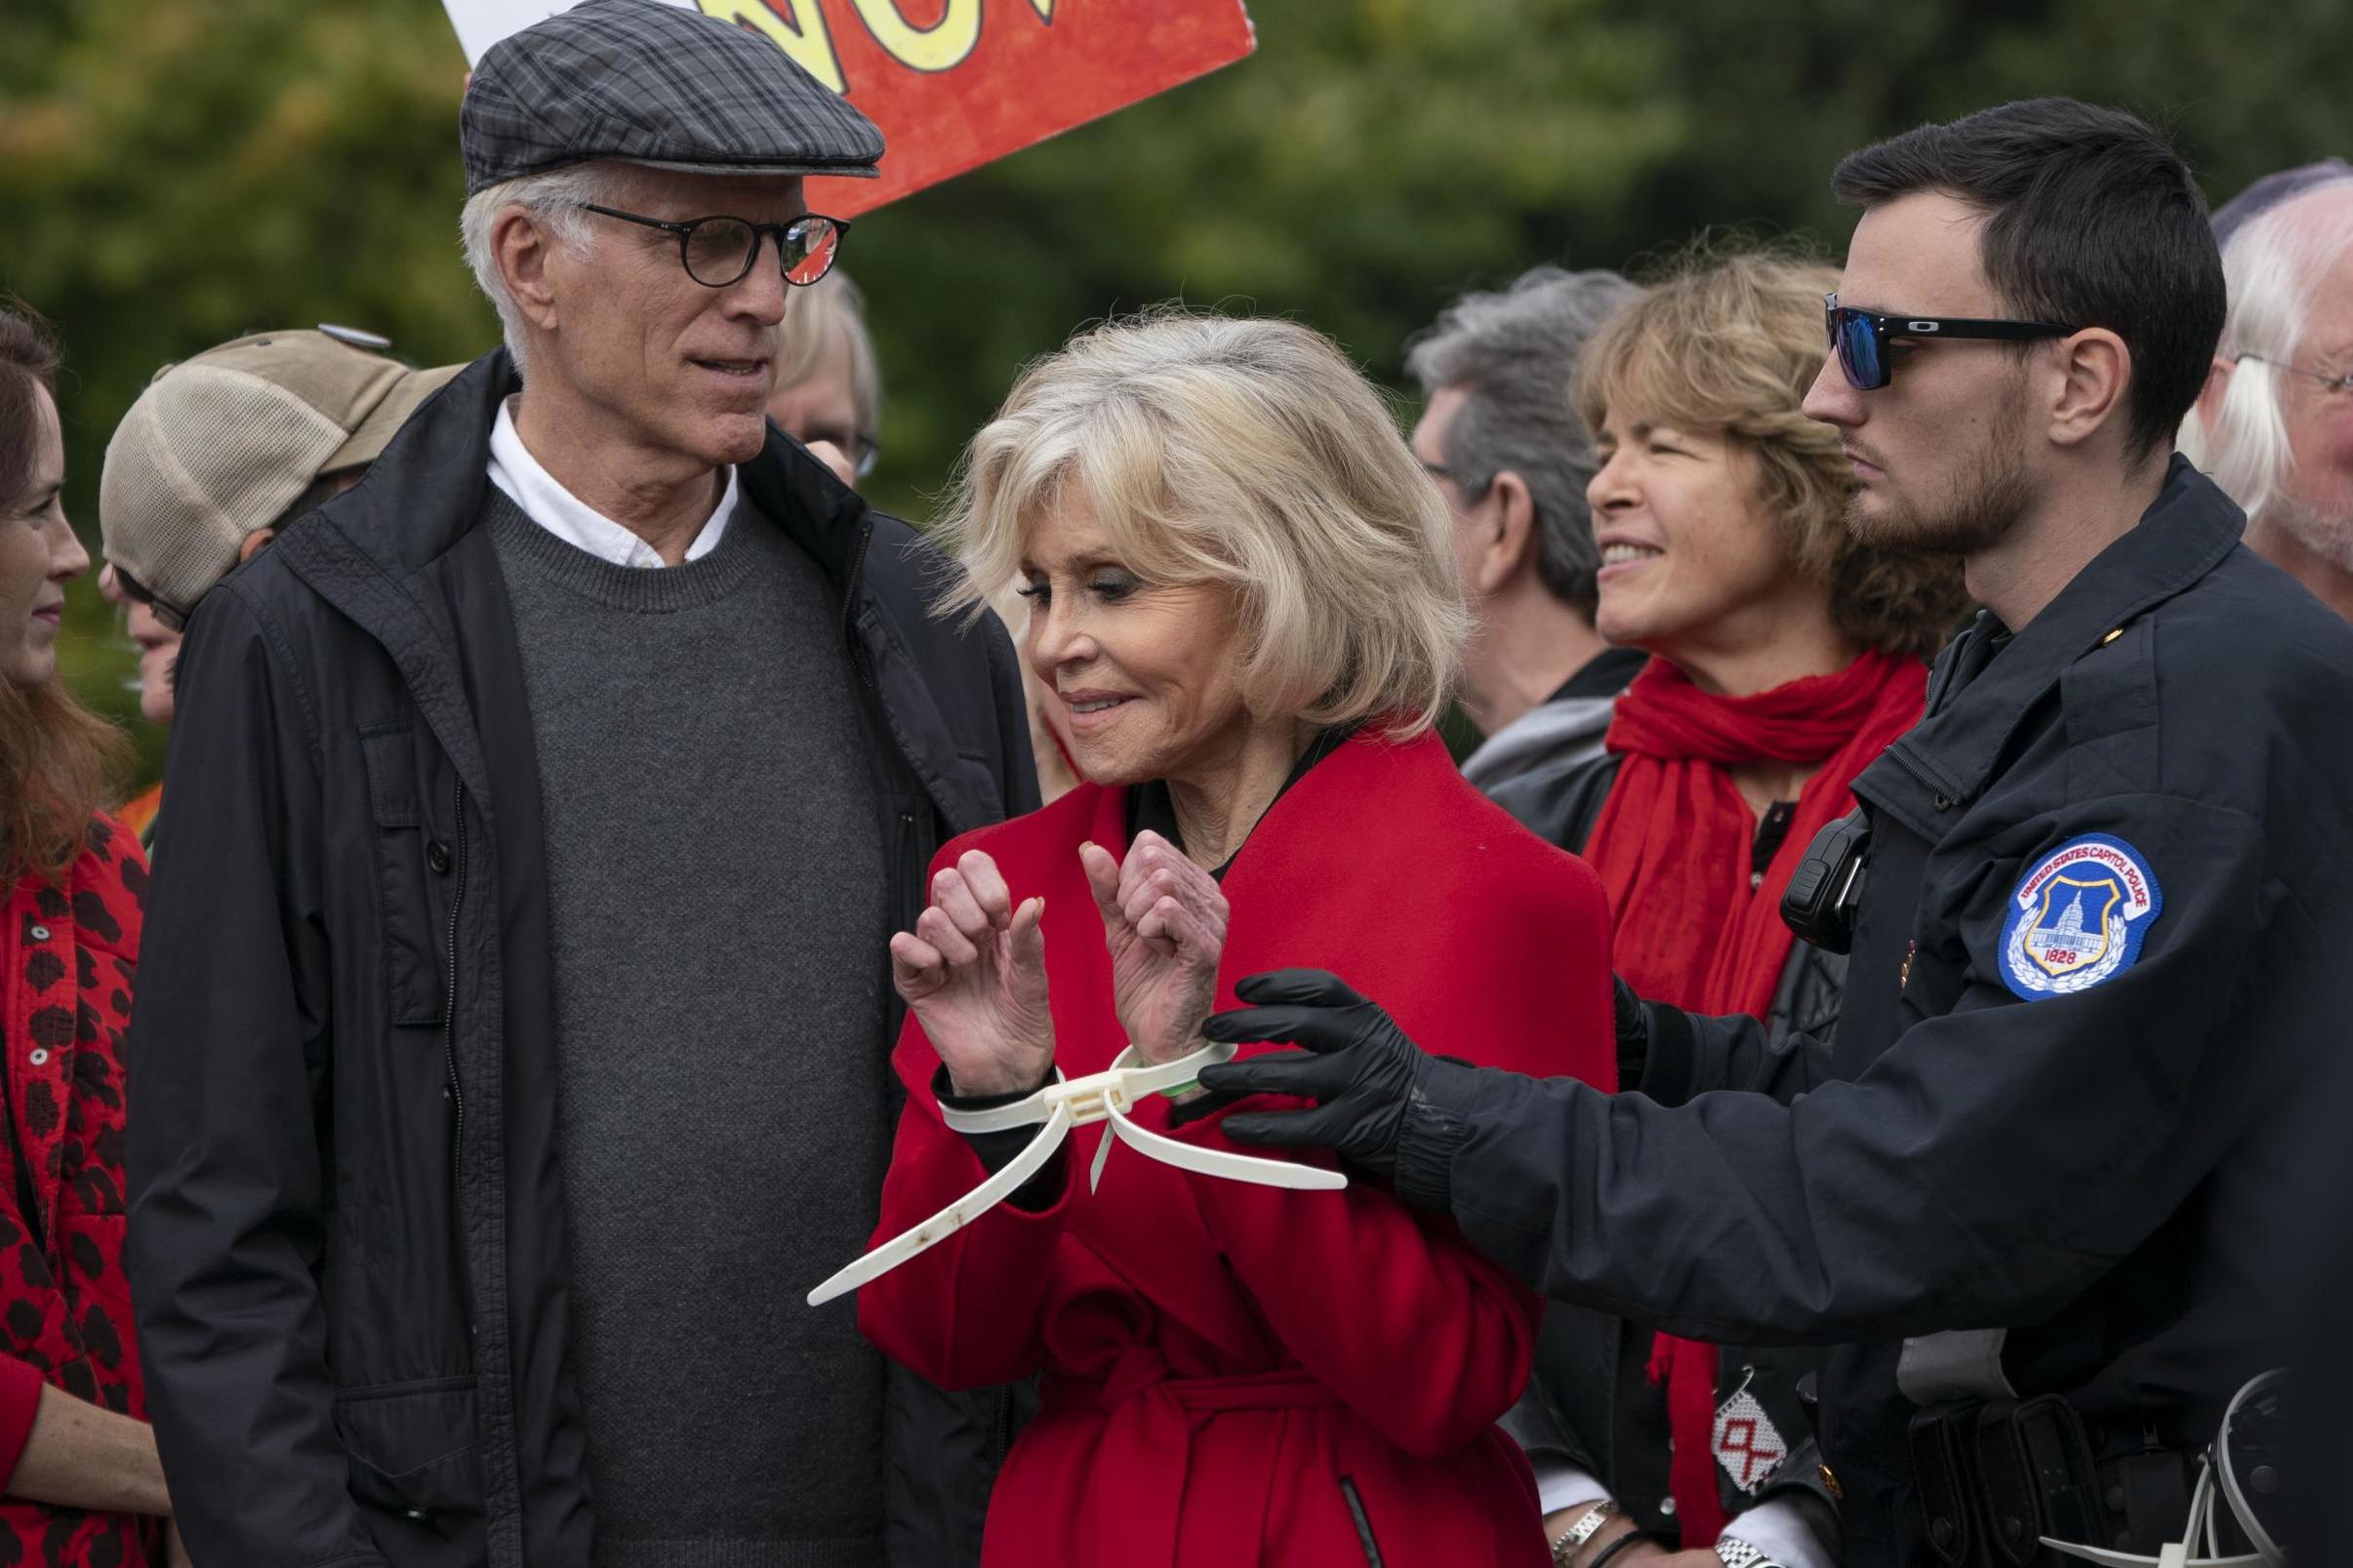 Ted Danson and Jane Fonda arrested while protesting climate change - The Independent